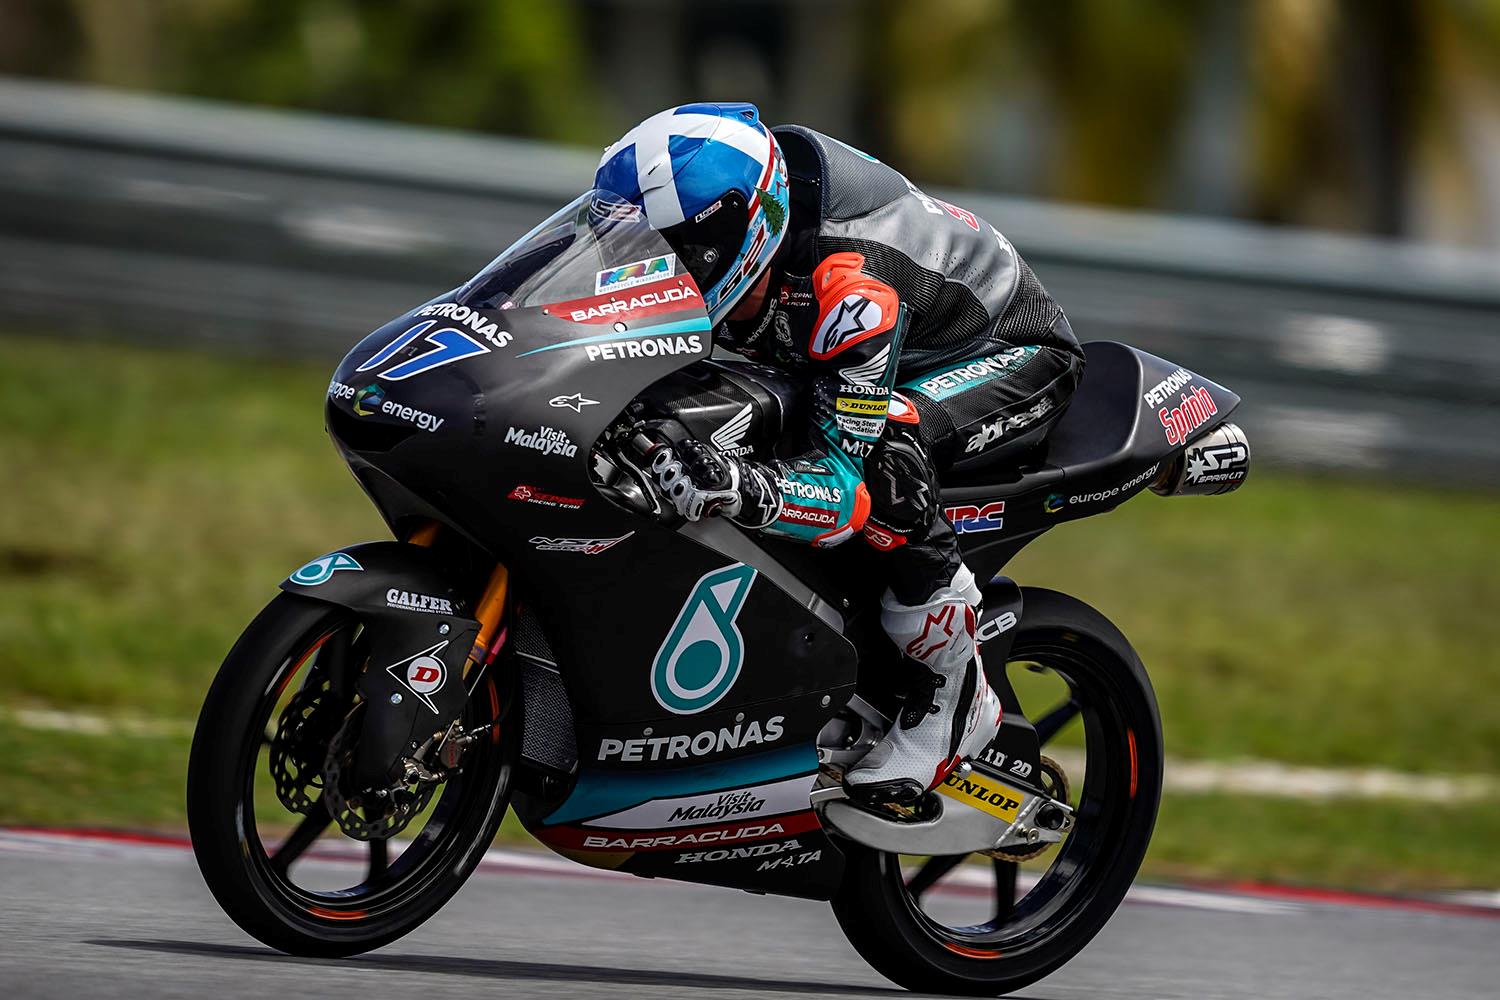 Moto3: Strong start for McPhee in Sepang | MCN